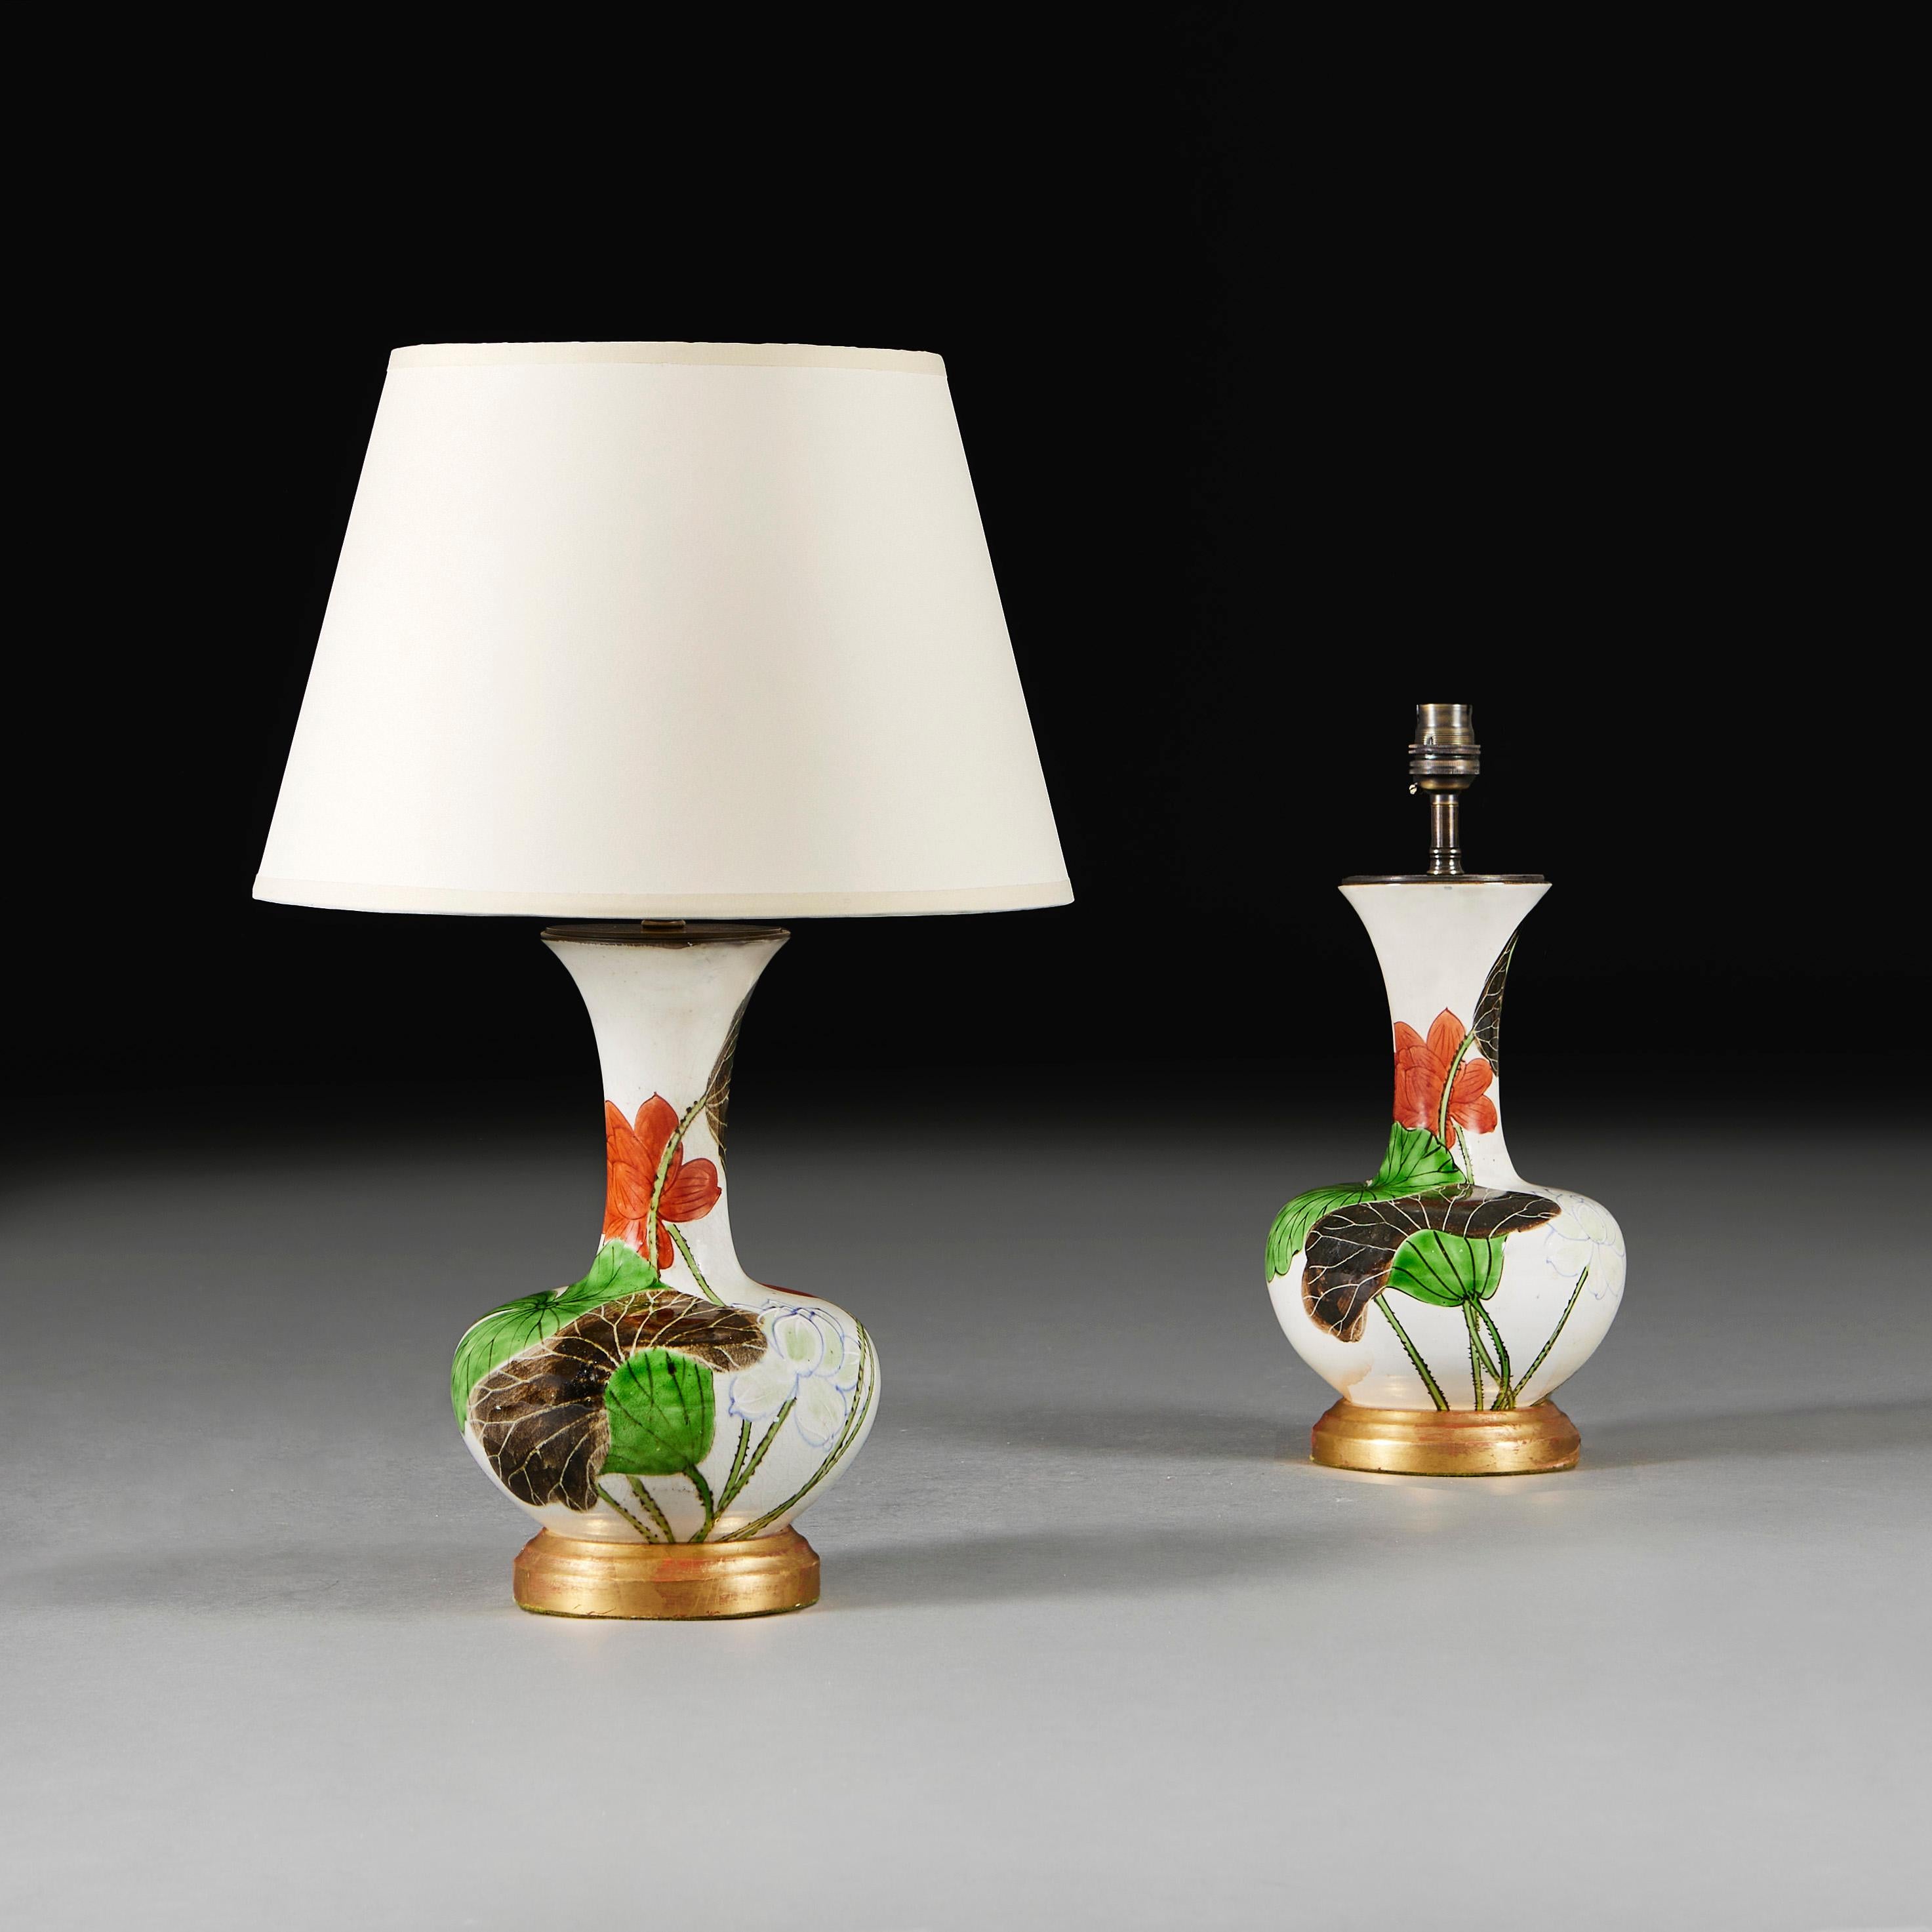 An unusual pair of late nineteenth century Japanese vases decorated with lotus flowers on a white ground, now mounted as lamps with turned giltwood bases.

Please note:
Lamps have been photographed with a 14” pale cream Pembroke card